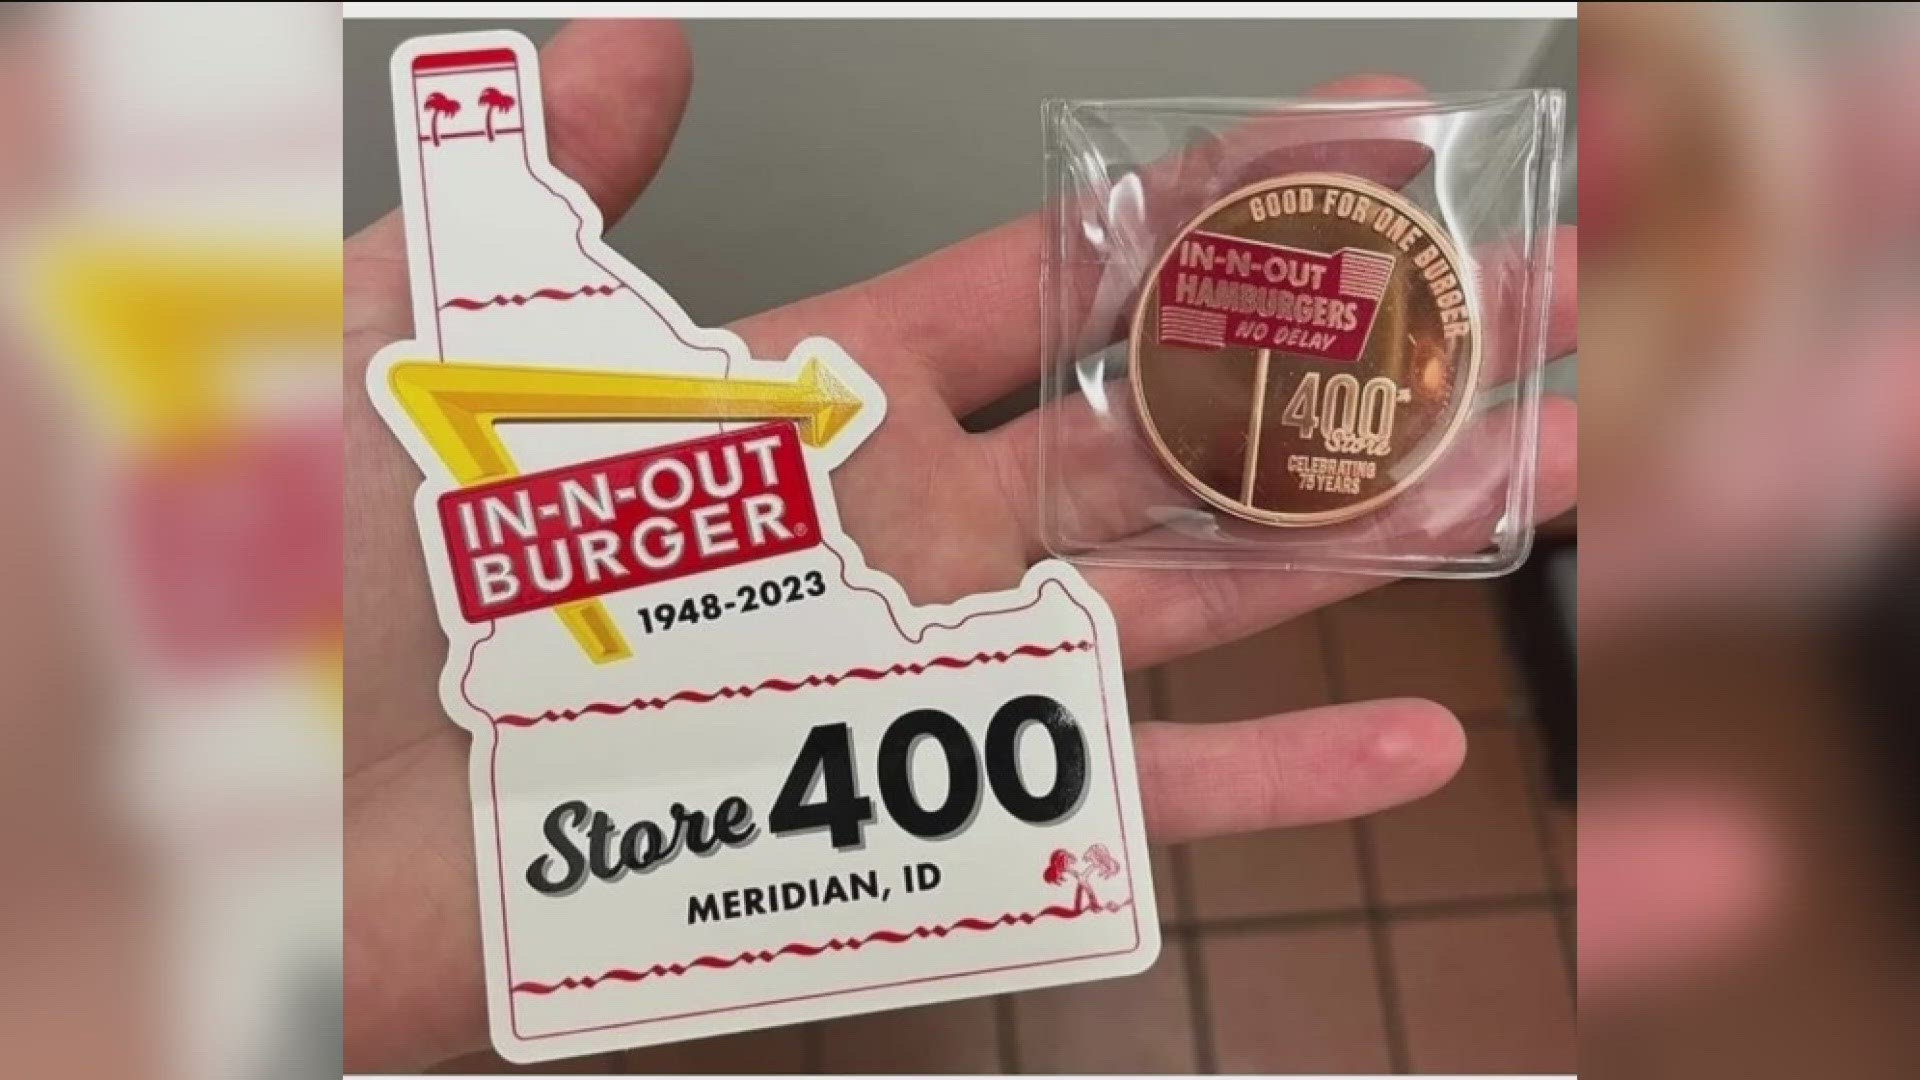 Idaho's first In-N-Out is the fast-food chain's 400th location.